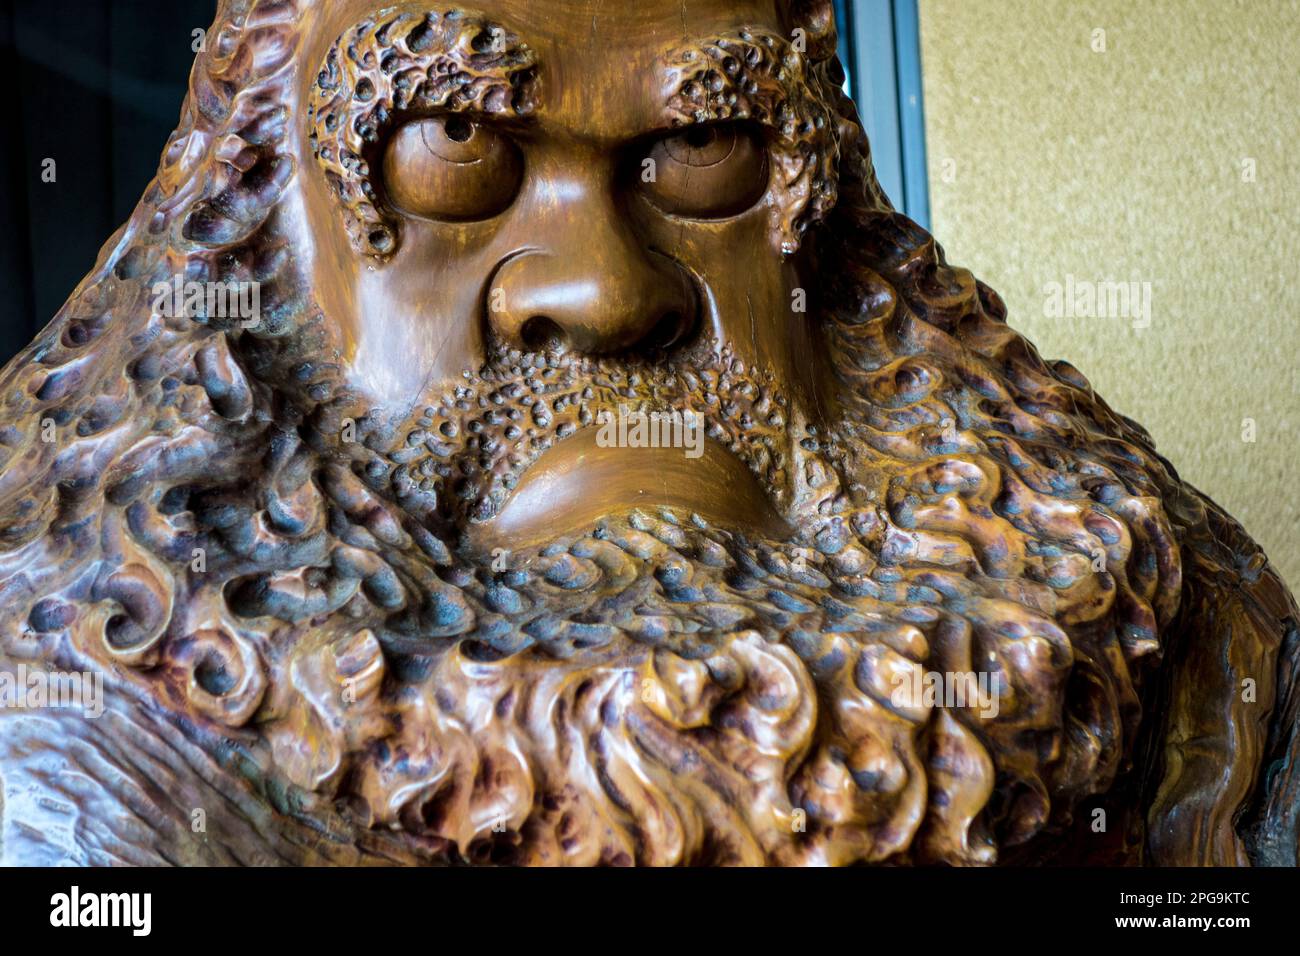 Statue of Bodhidharma, Hsi Lai Temple, city of Hacienda Heights, Los Angeles County, California, United States of America Stock Photo